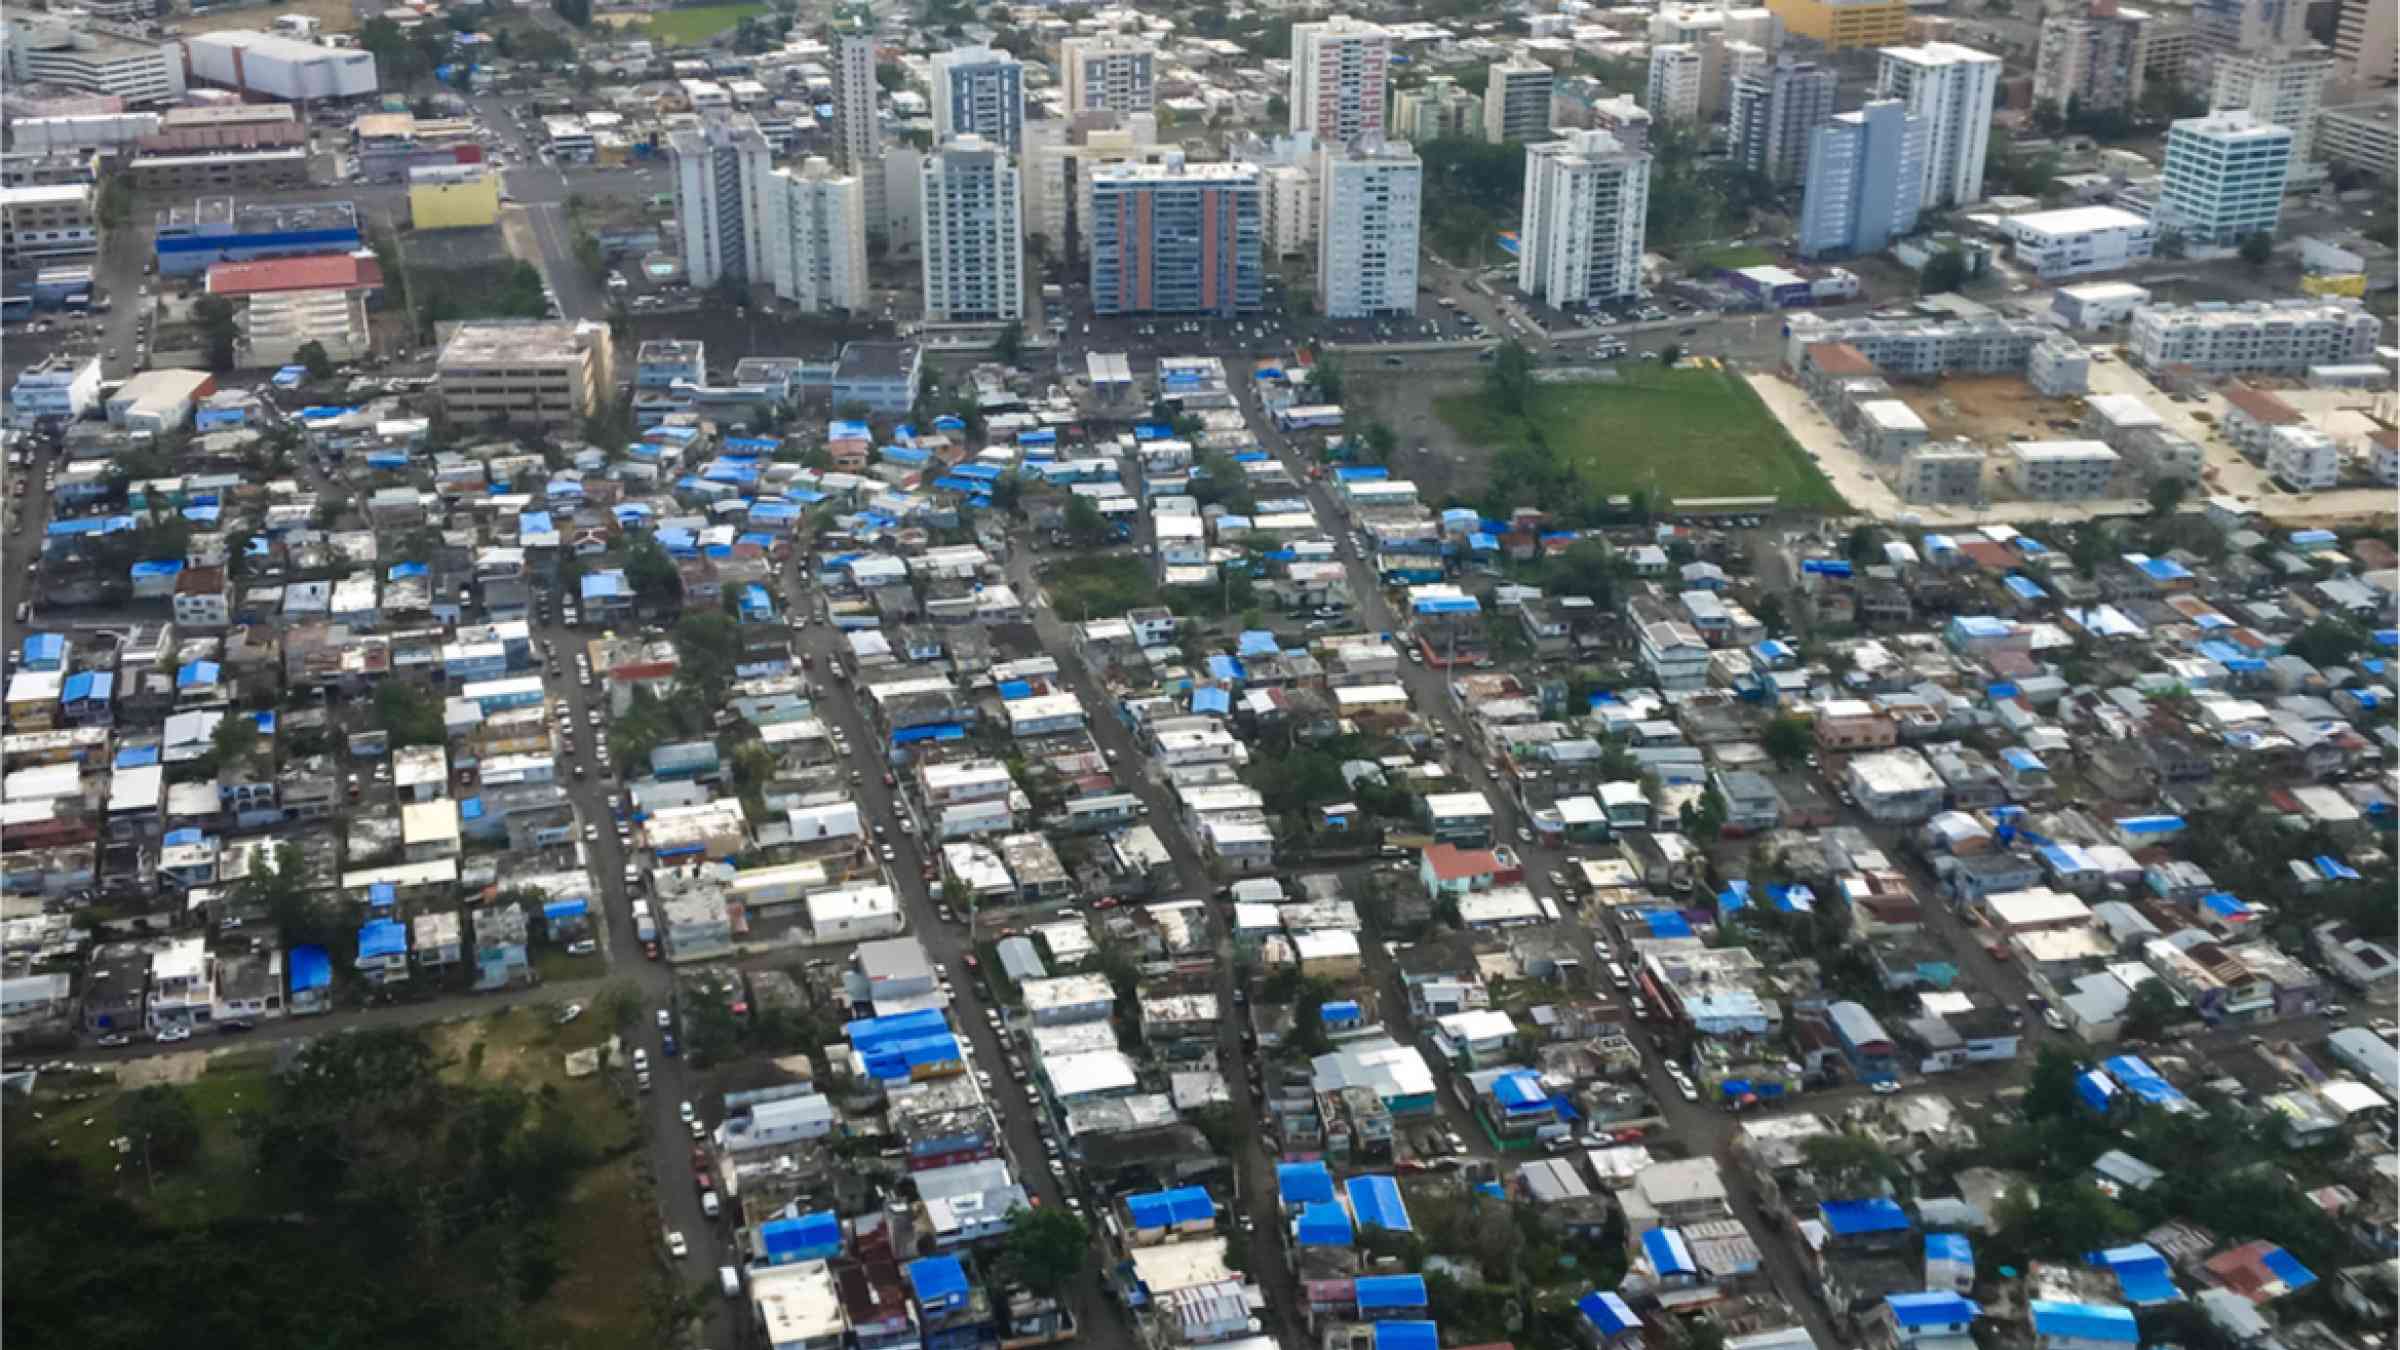 Blue tarps cover damaged roofs in San Juan, Puerto Rico after Hurricane Maria in September 2017.